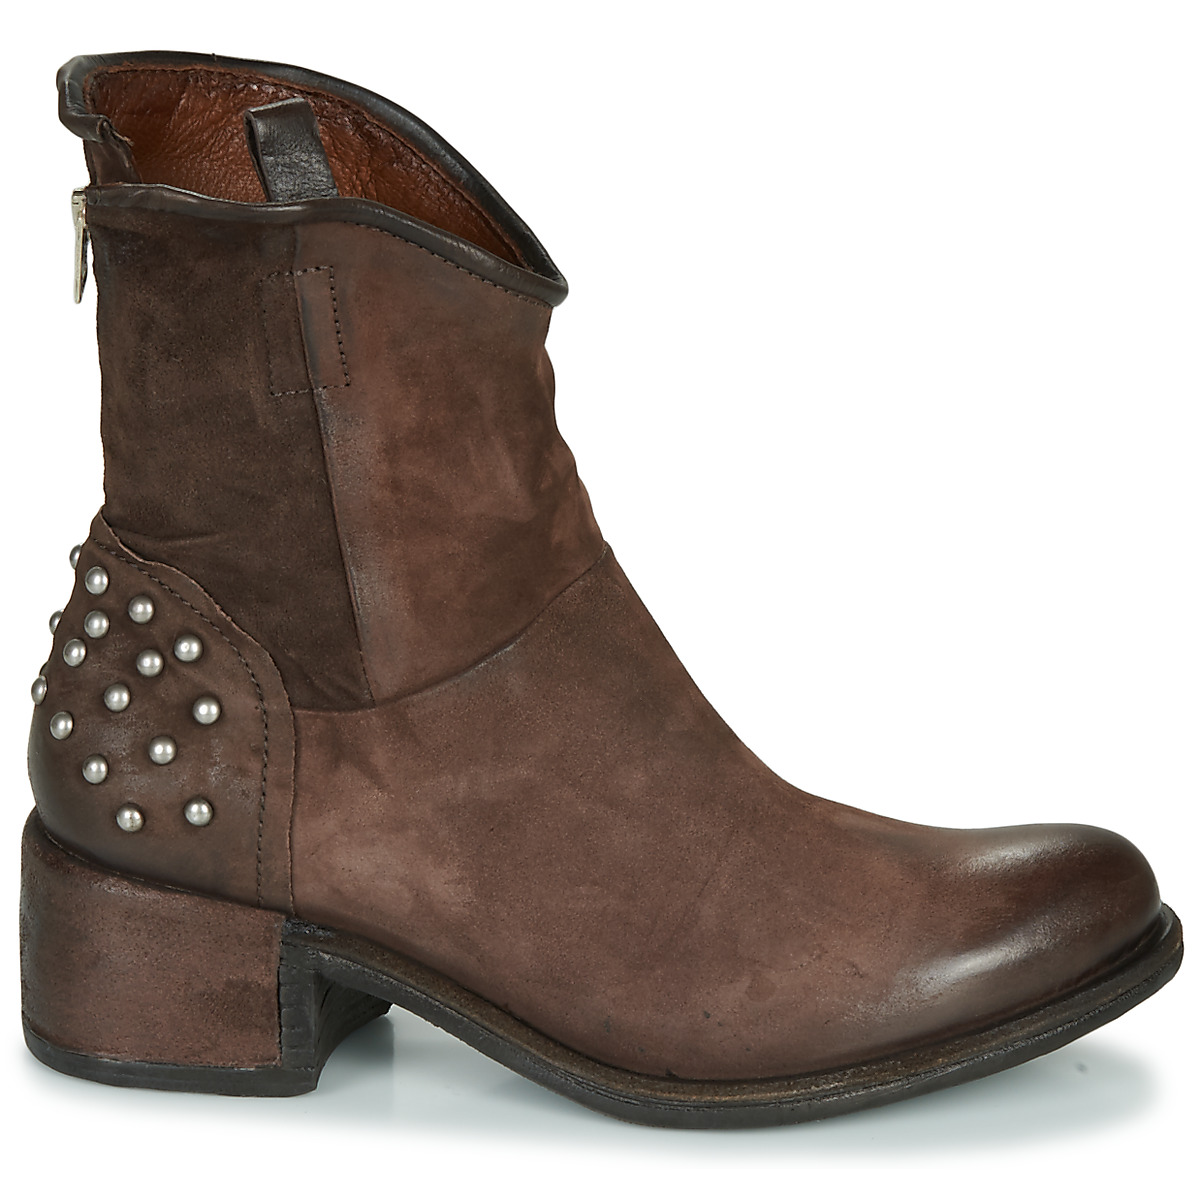 Airstep / A.S.98 Marron OPEA STUDS 9jNMSvIc